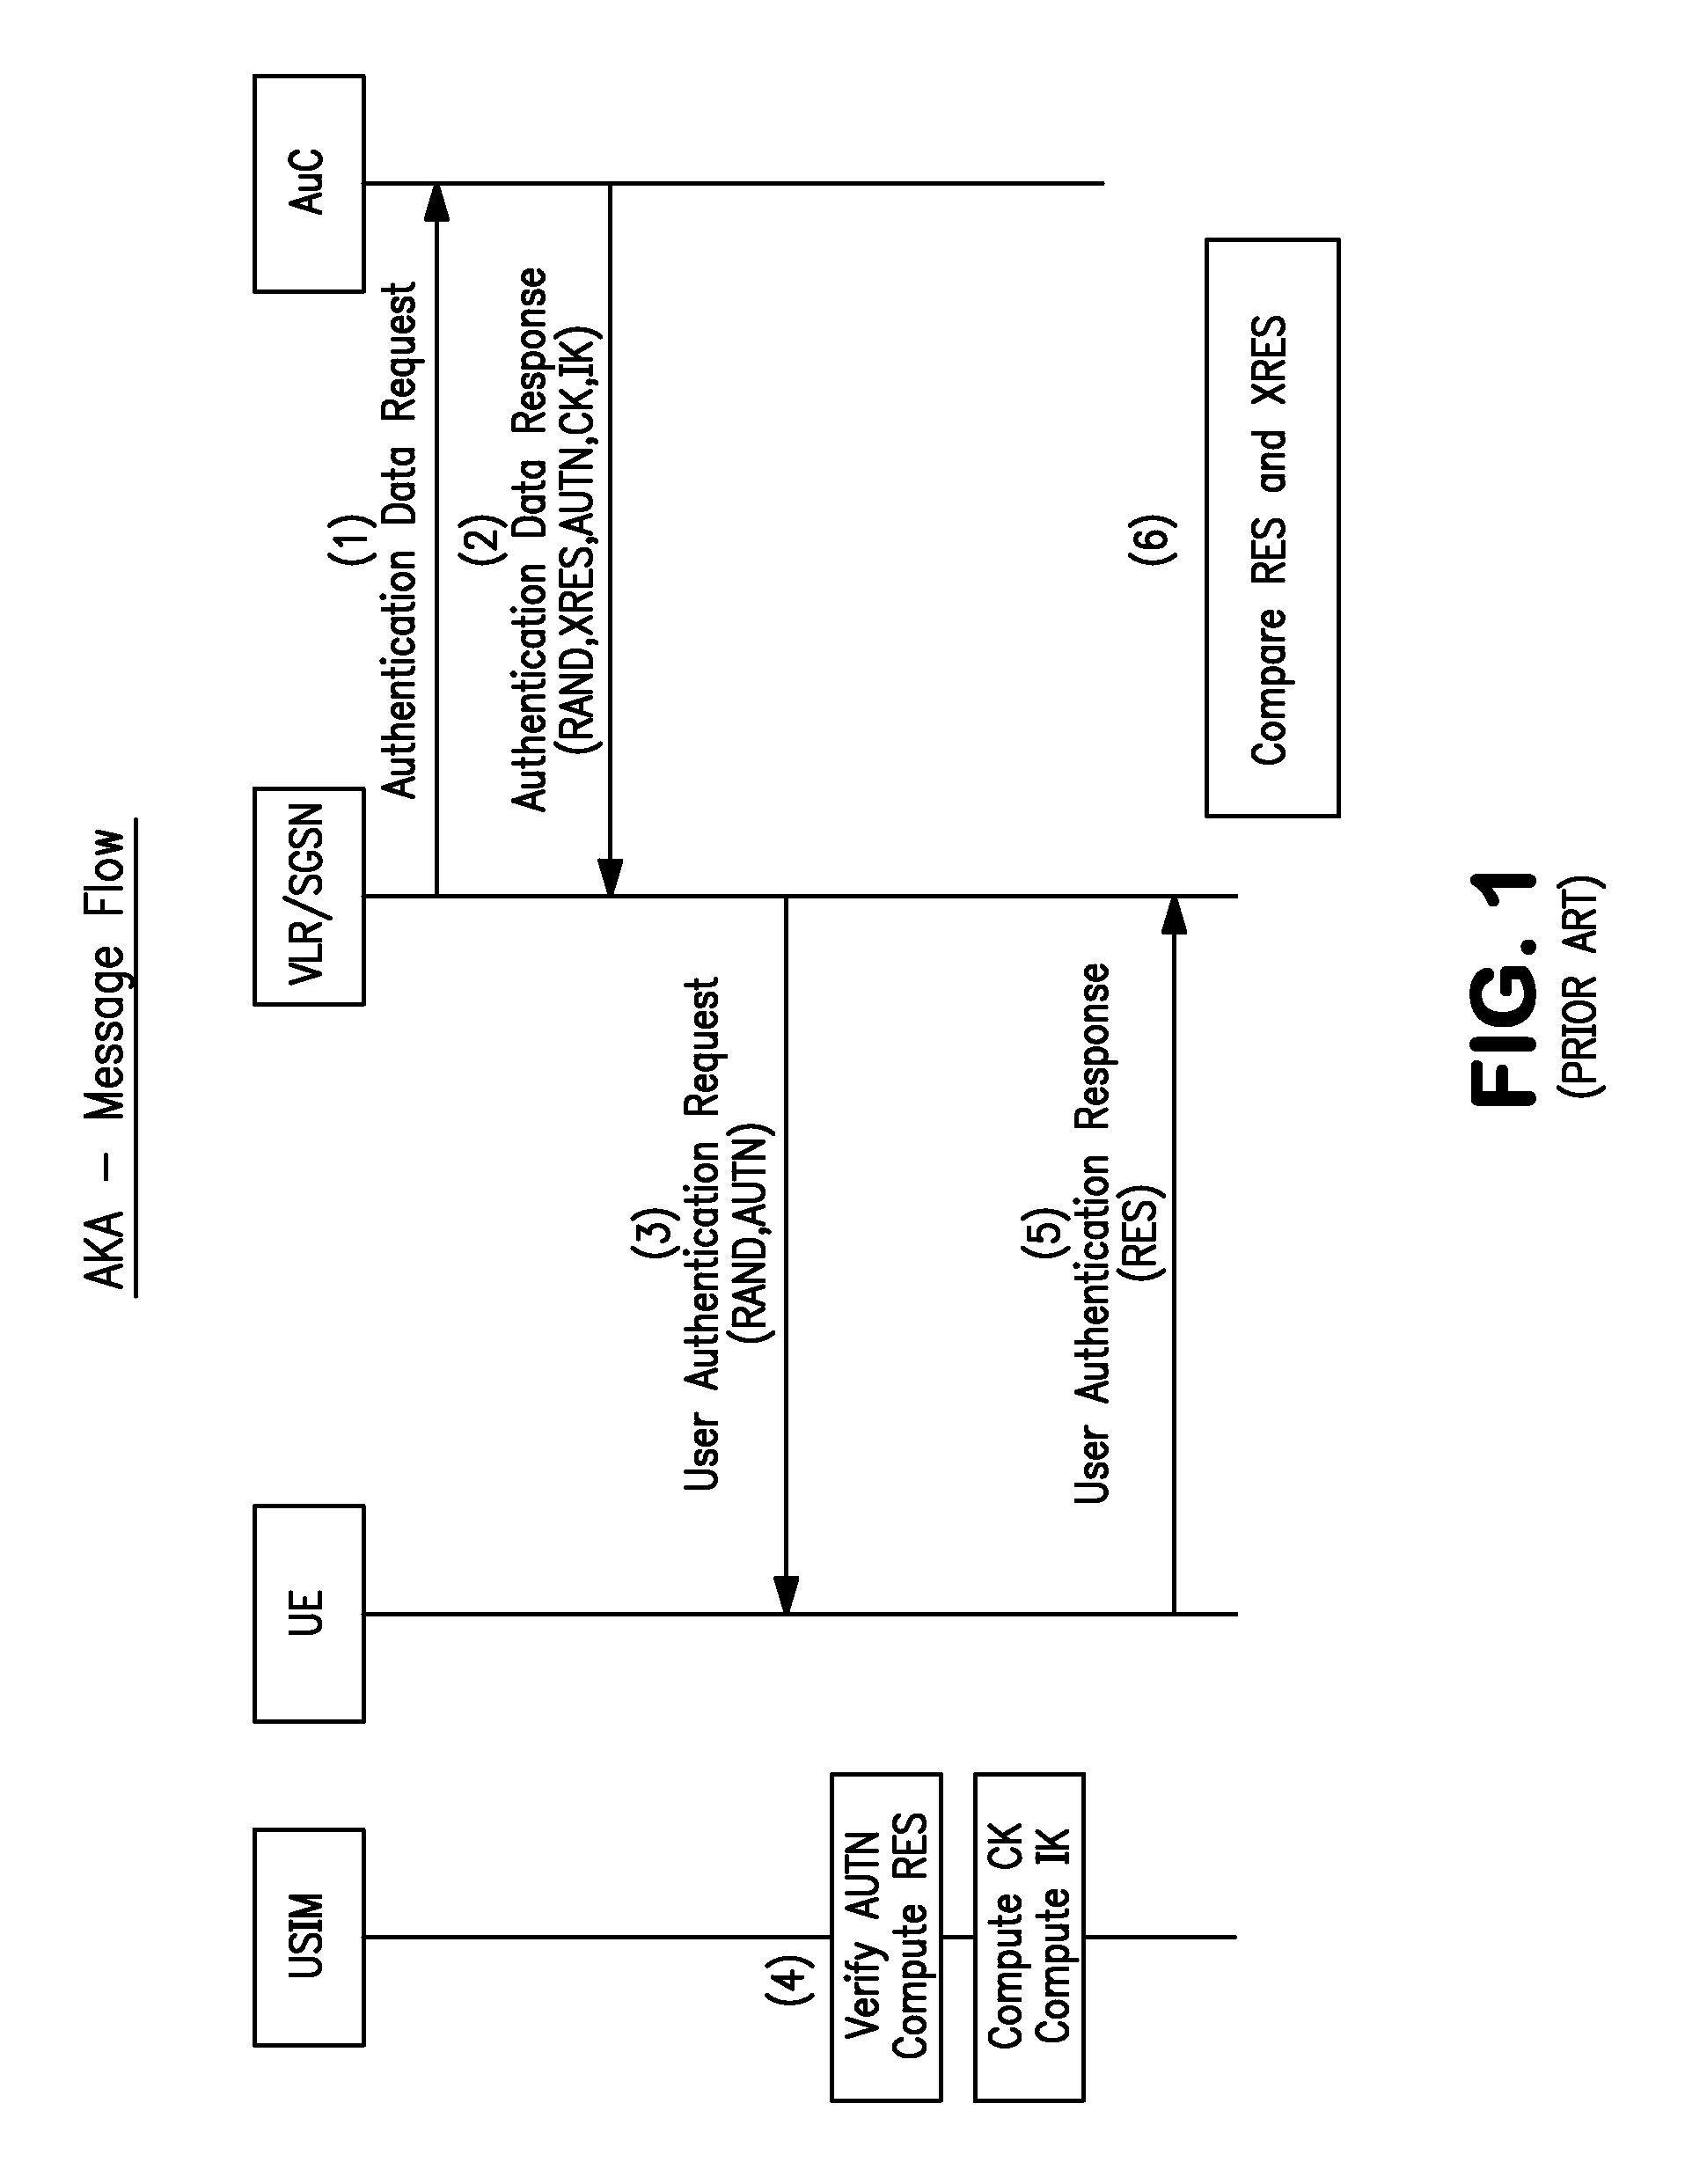 Electronic access client distribution apparatus and methods